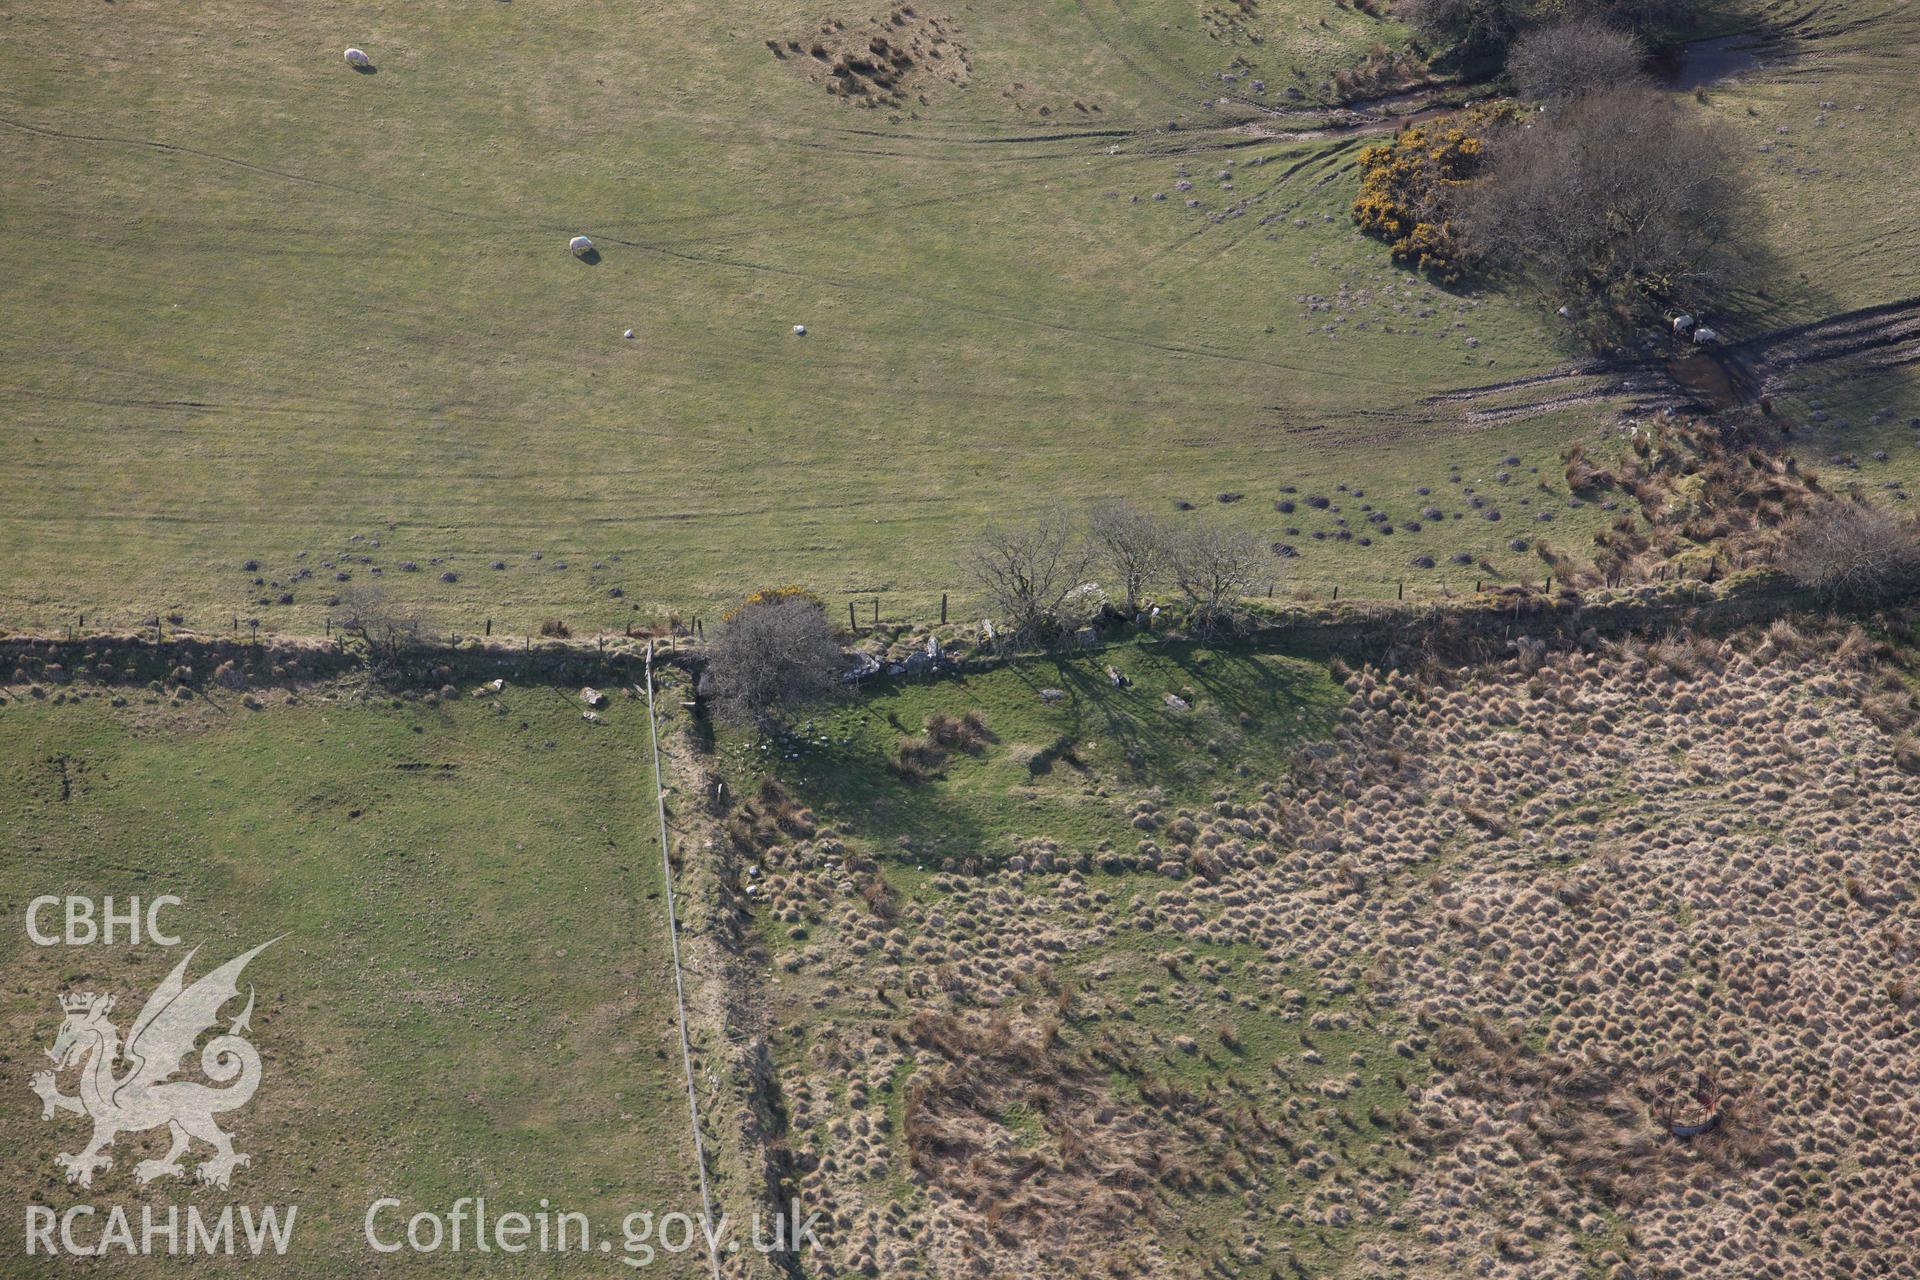 RCAHMW colour oblique aerial photograph of Cerrig Llwydion Chambered Tomb. Taken on 13 April 2010 by Toby Driver